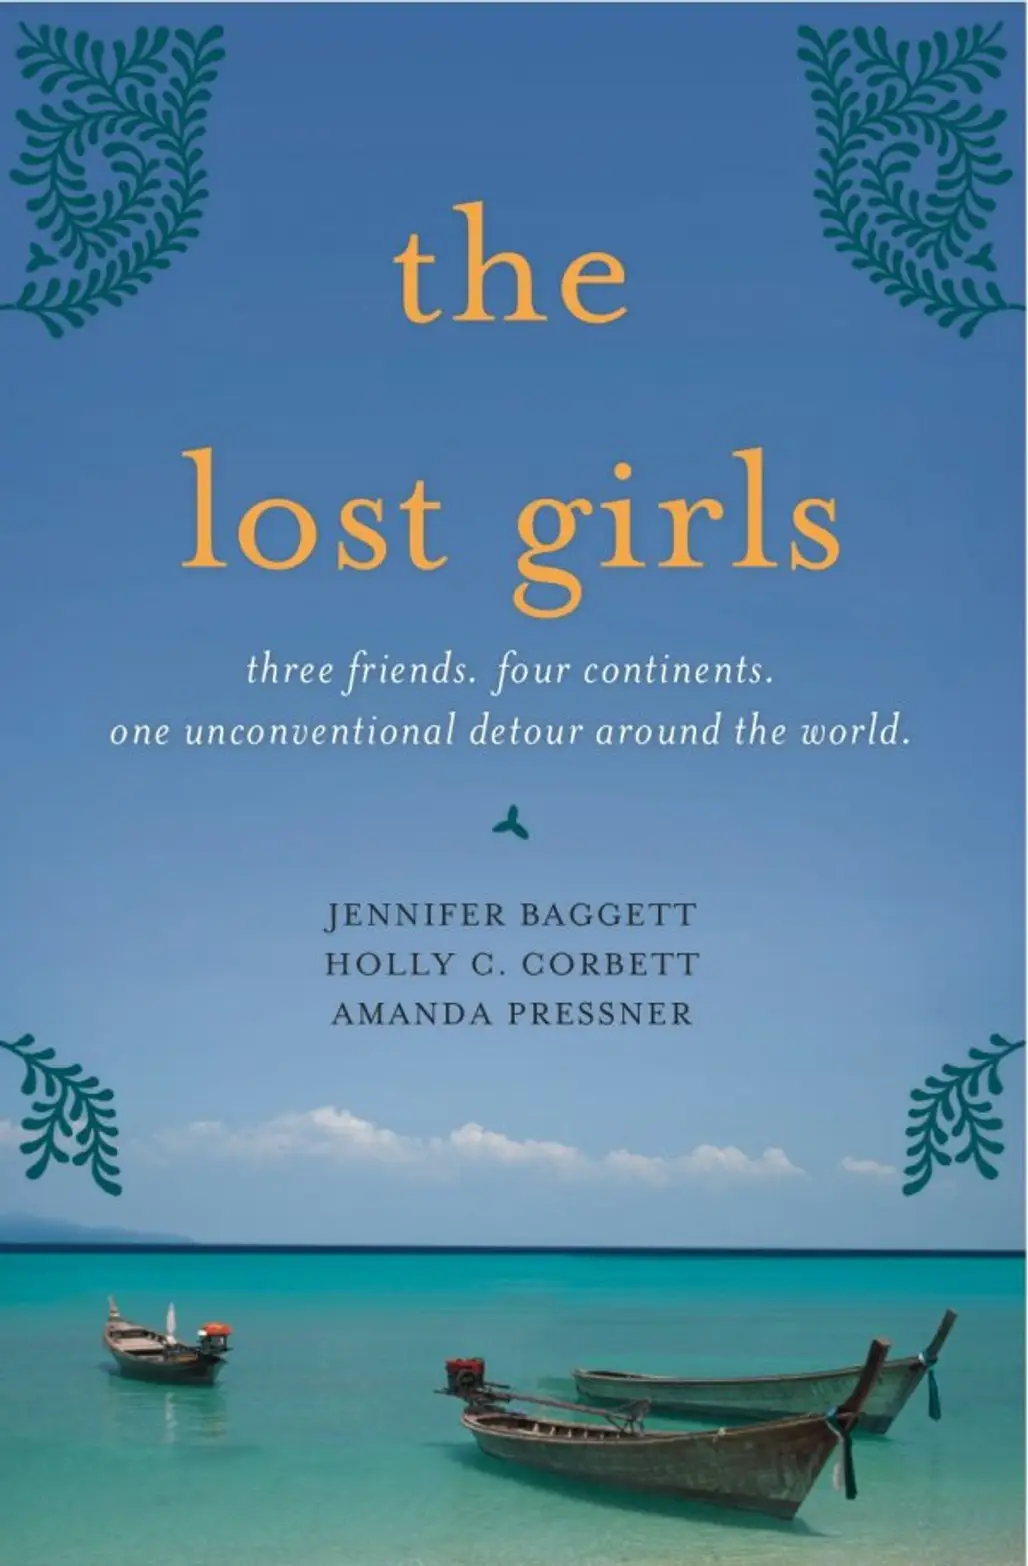 The Lost Girls: Three Friends. Four Continents. One Unconventional Detour around the World. by Jennifer Baggett